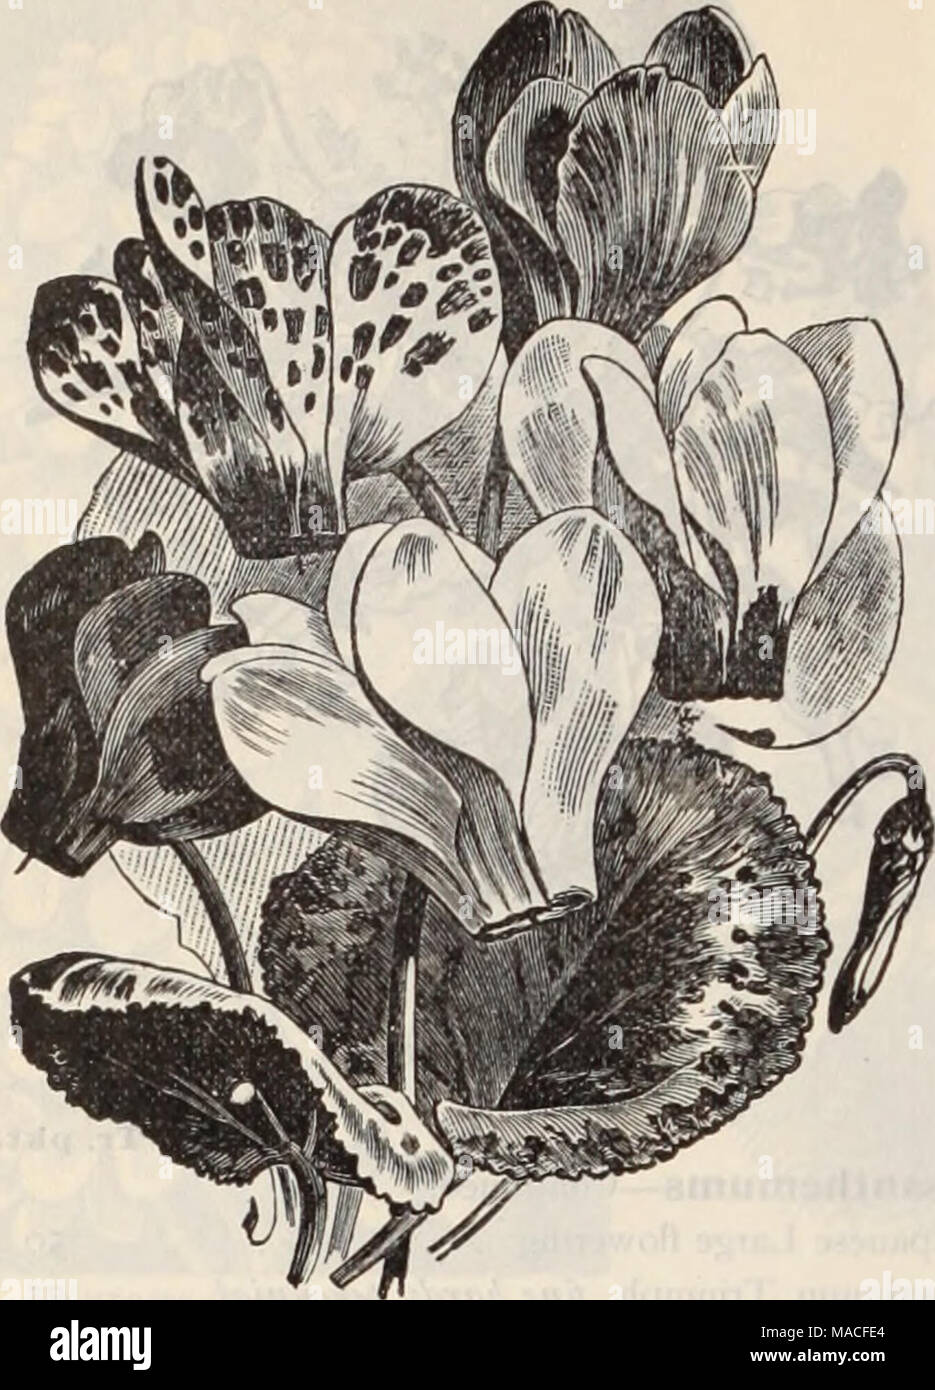 . Dreer's wholesale price list / Henry A. Dreer. . Cyclambn Persicom Giganteum. Tr. pkt. Oz. Cyclamen persicum, finest mixed 30 I 25 Papilio (new Butterfly Cyclamen) . . 35 100 1000 seeds, seeds. per. giganteum, pure while 75 6 00 &quot; &quot; white with cannine eye ... 75 6 00 &quot; &quot; rose 75 6 00 &quot; &quot; blood red 75 6 00 &quot; &quot; mixed 60 5 00 &quot; &quot; double flowering, 25 cts. per pkt. Dahlia, Large flg., double mixed 25 I 00 Small flg. (pompone) double mixed .... 25 I 00 [ Cactus, double mixed 30 I 50 Single striped mixed {^gracilis') 15 5° &quot; mixed 10 30 &quot; Stock Photo